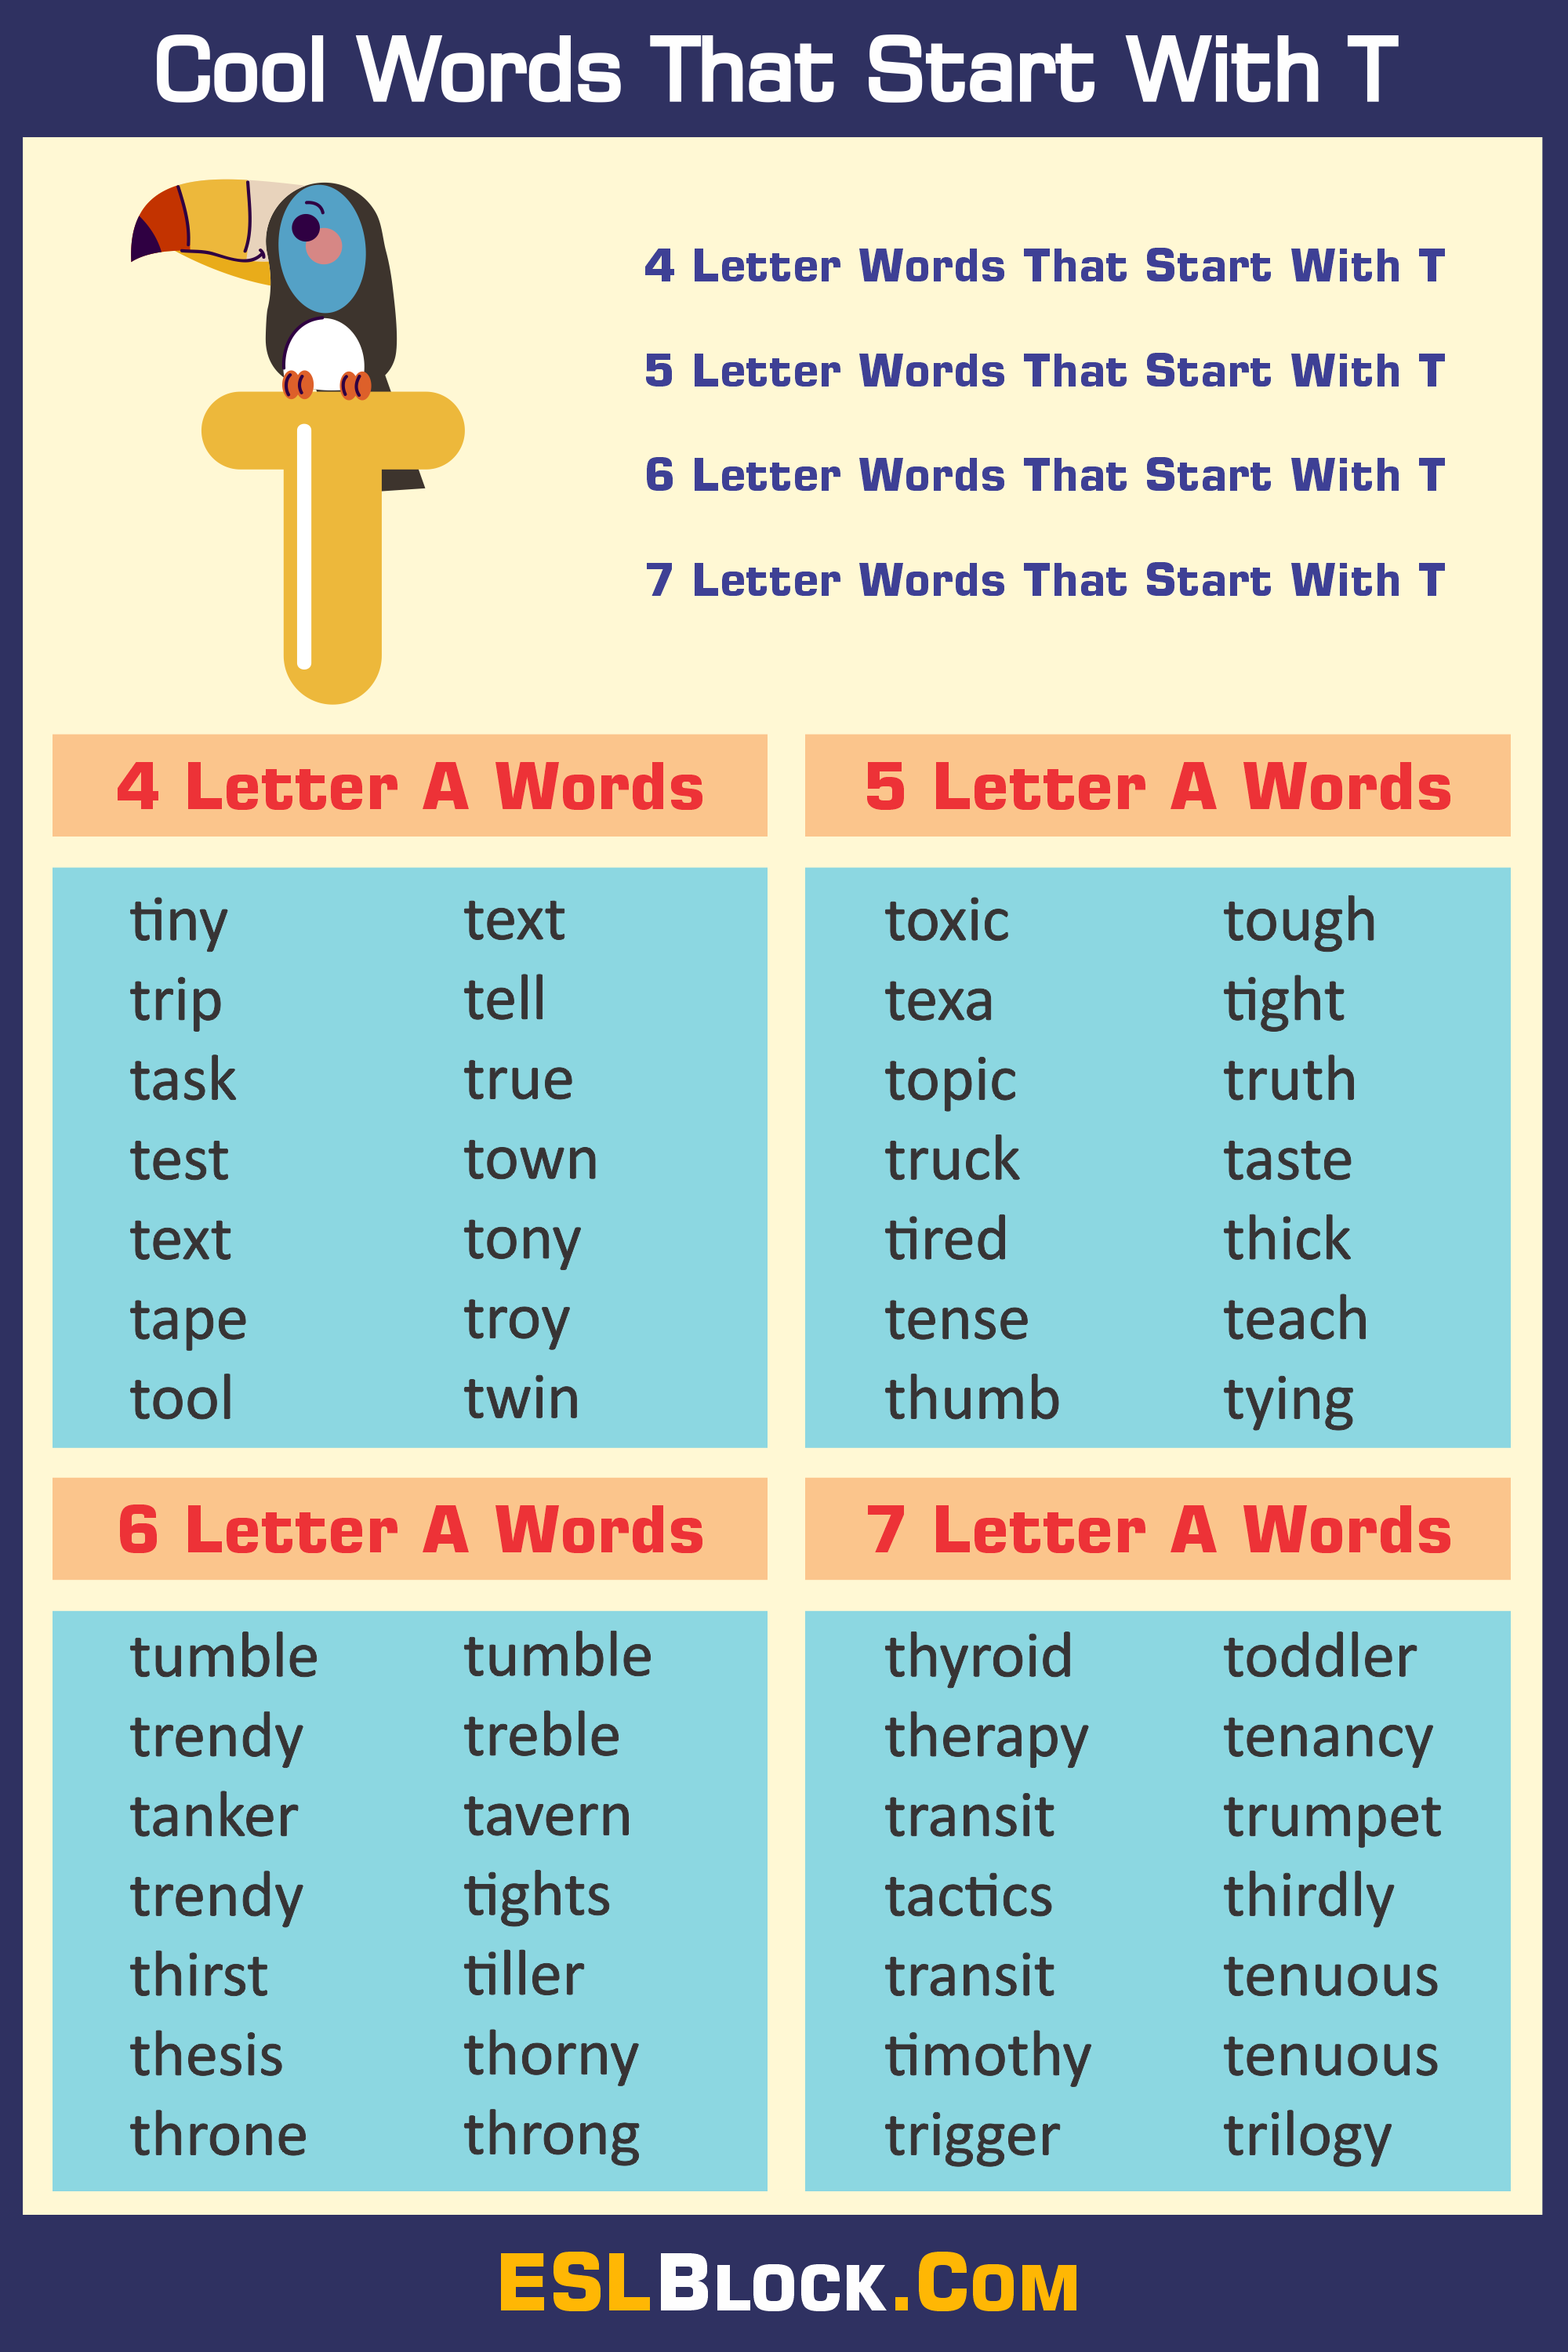 4 Letter Words, 4 Letter Words That Start With T, 5 Letter Words, 5 Letter Words That Start With T, 6 Letter Words, 6 Letter Words That Start With T, 7 Letter Words, 7 Letter Words That Start With T, Awesome Cool Words, Christmas Words That Start With T, Cool Words, Describing Words That Start With T, Descriptive Words That Start With T, English Words, Five Letter Words Starting with T, Good Words That Start With T, Nice Words That Start With T, Positive Words That Start With T, T Words, Unique Words, Word Dictionary, Words That Start With T, Words That Start With T to Describe Someone